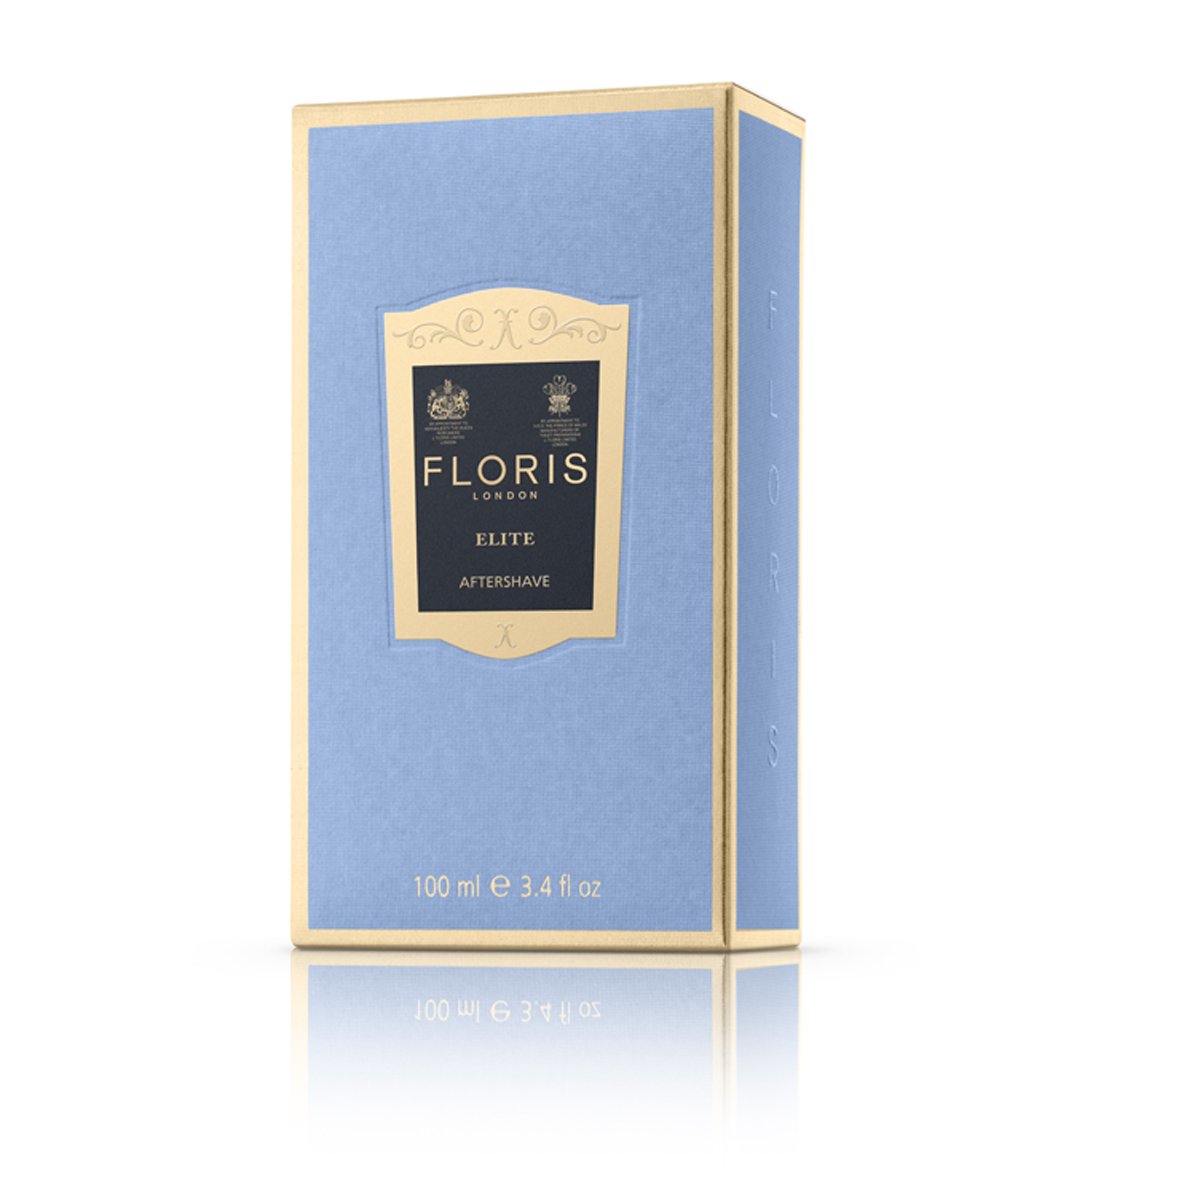 Light blue packaging box with dark blue and gold label reading 'Elite aftershave'.